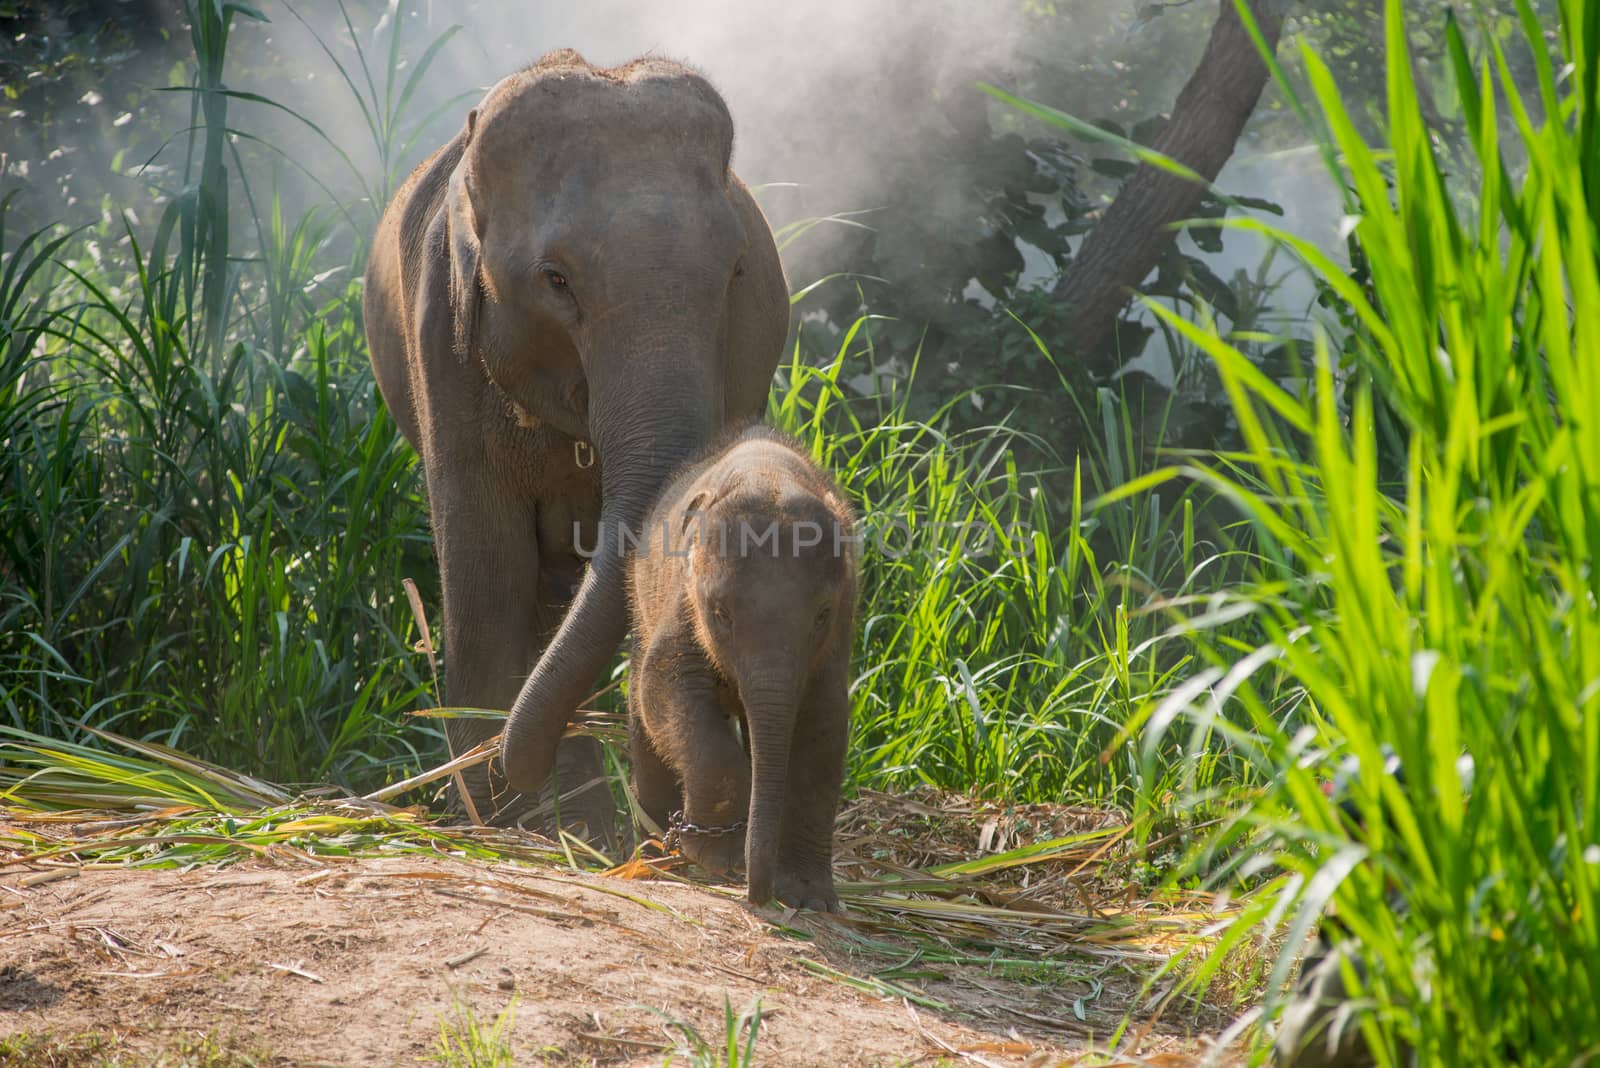 A young elephant right next to an adult one. by chanwity